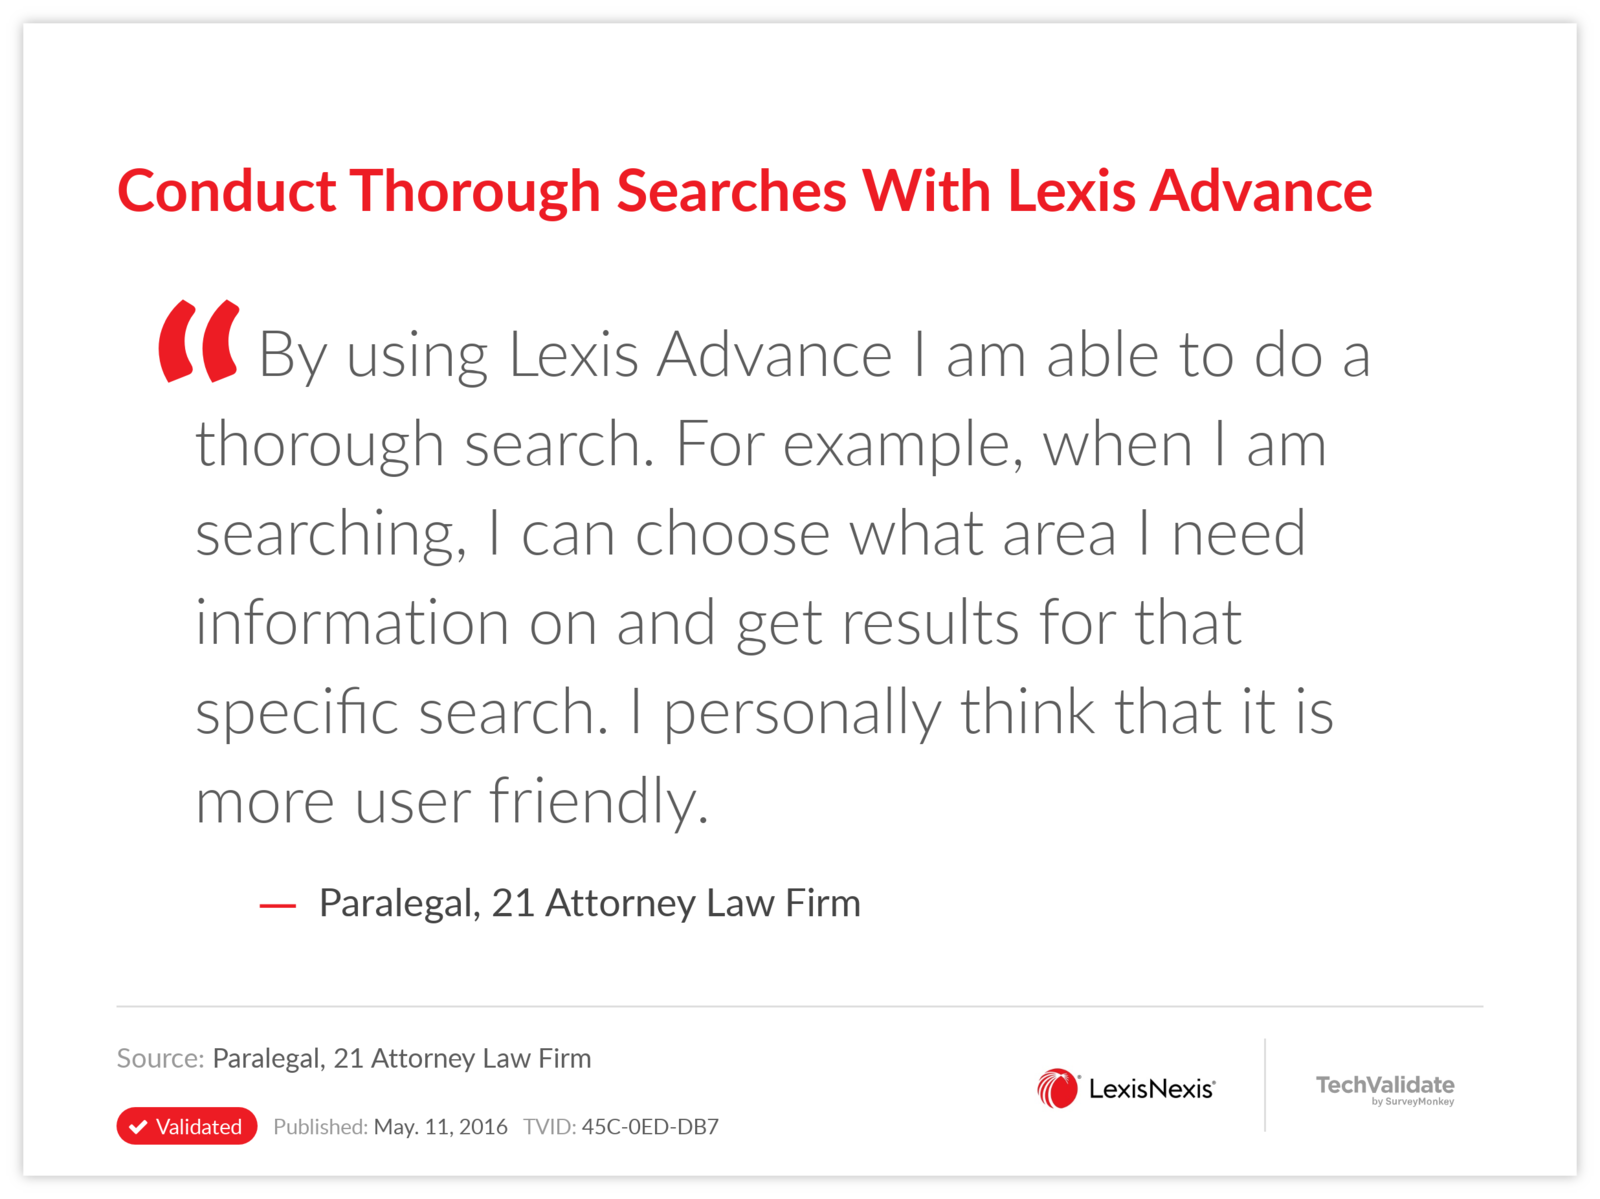 Conduct Thorough Searches With Lexis Advance